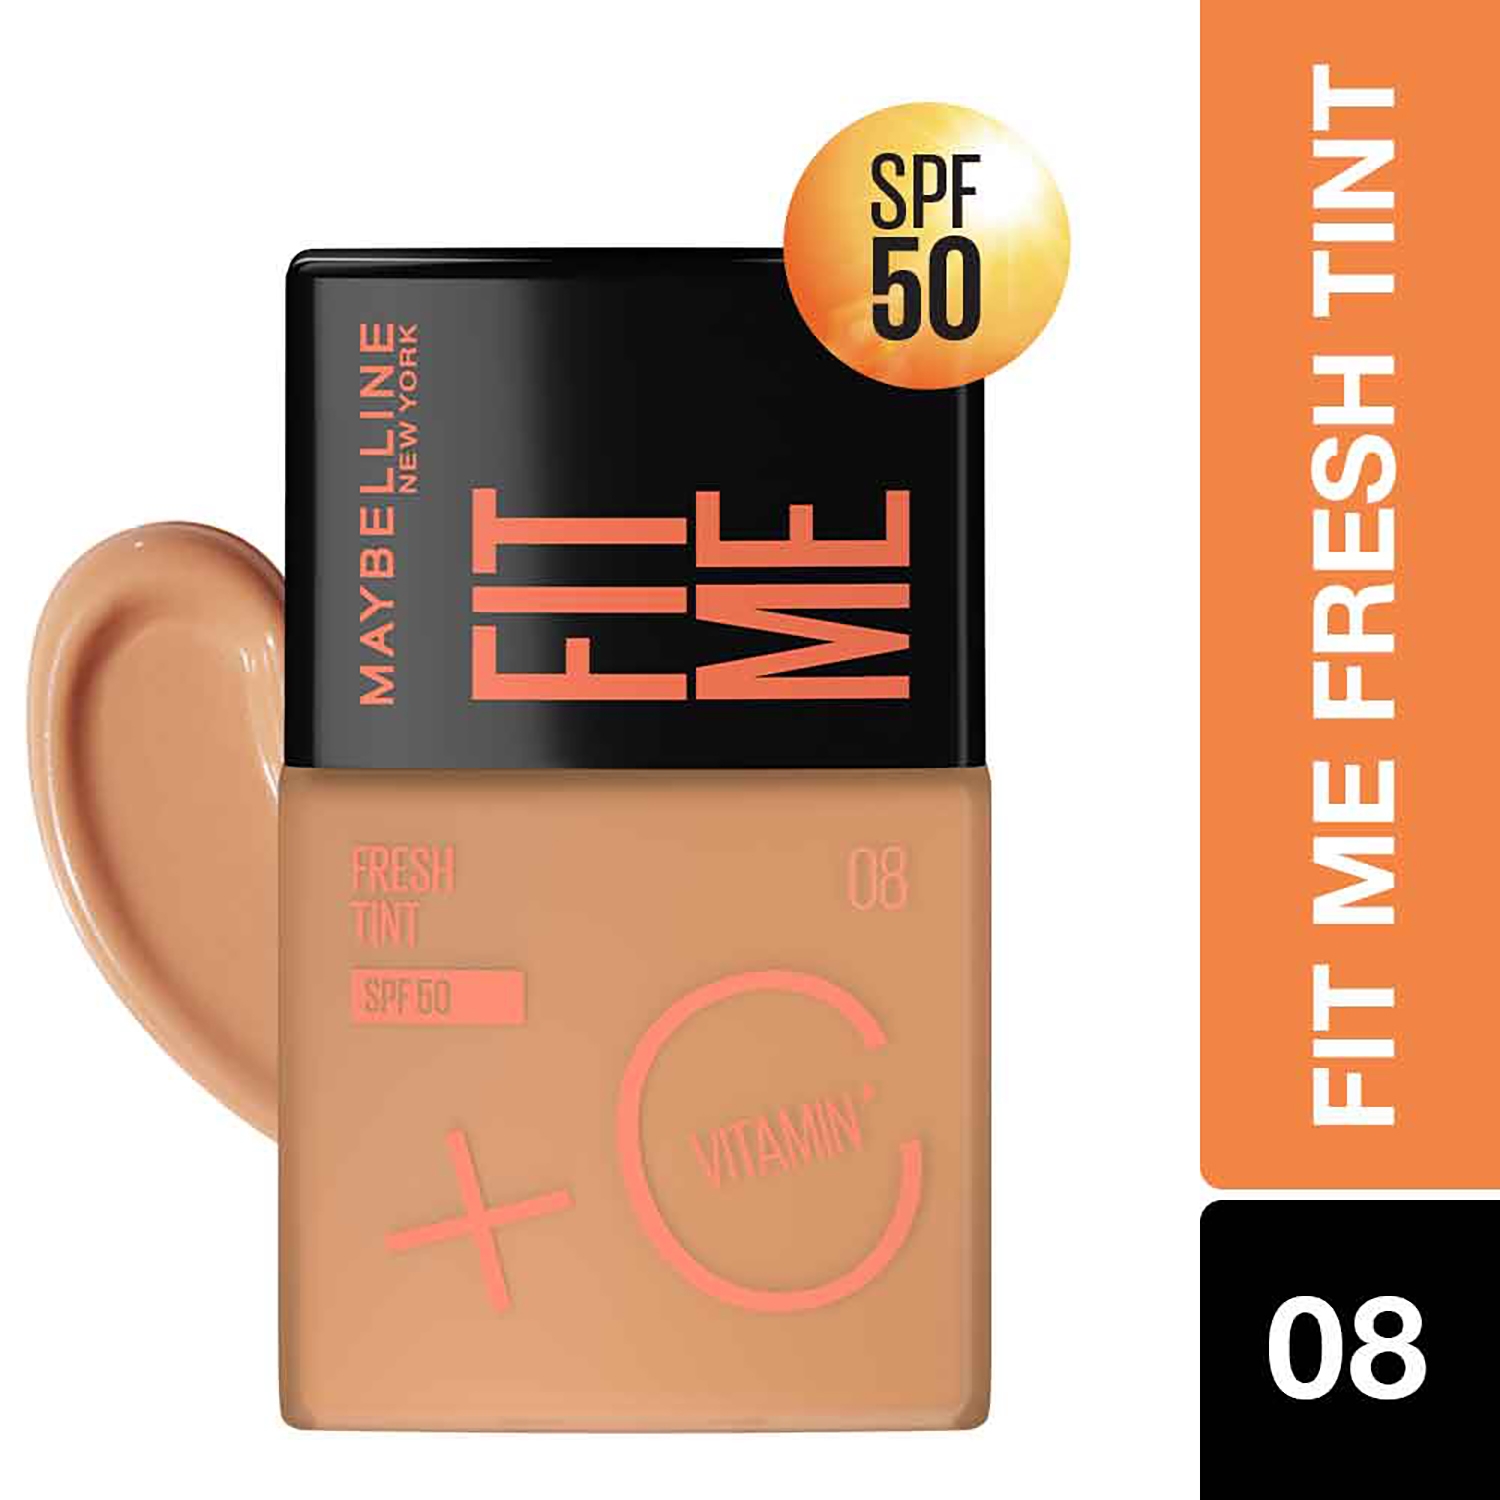 Maybelline New York | Maybelline New York Fit Me Fresh Tint With SPF 50 & Vitamin C - 08 Shade (30ml)